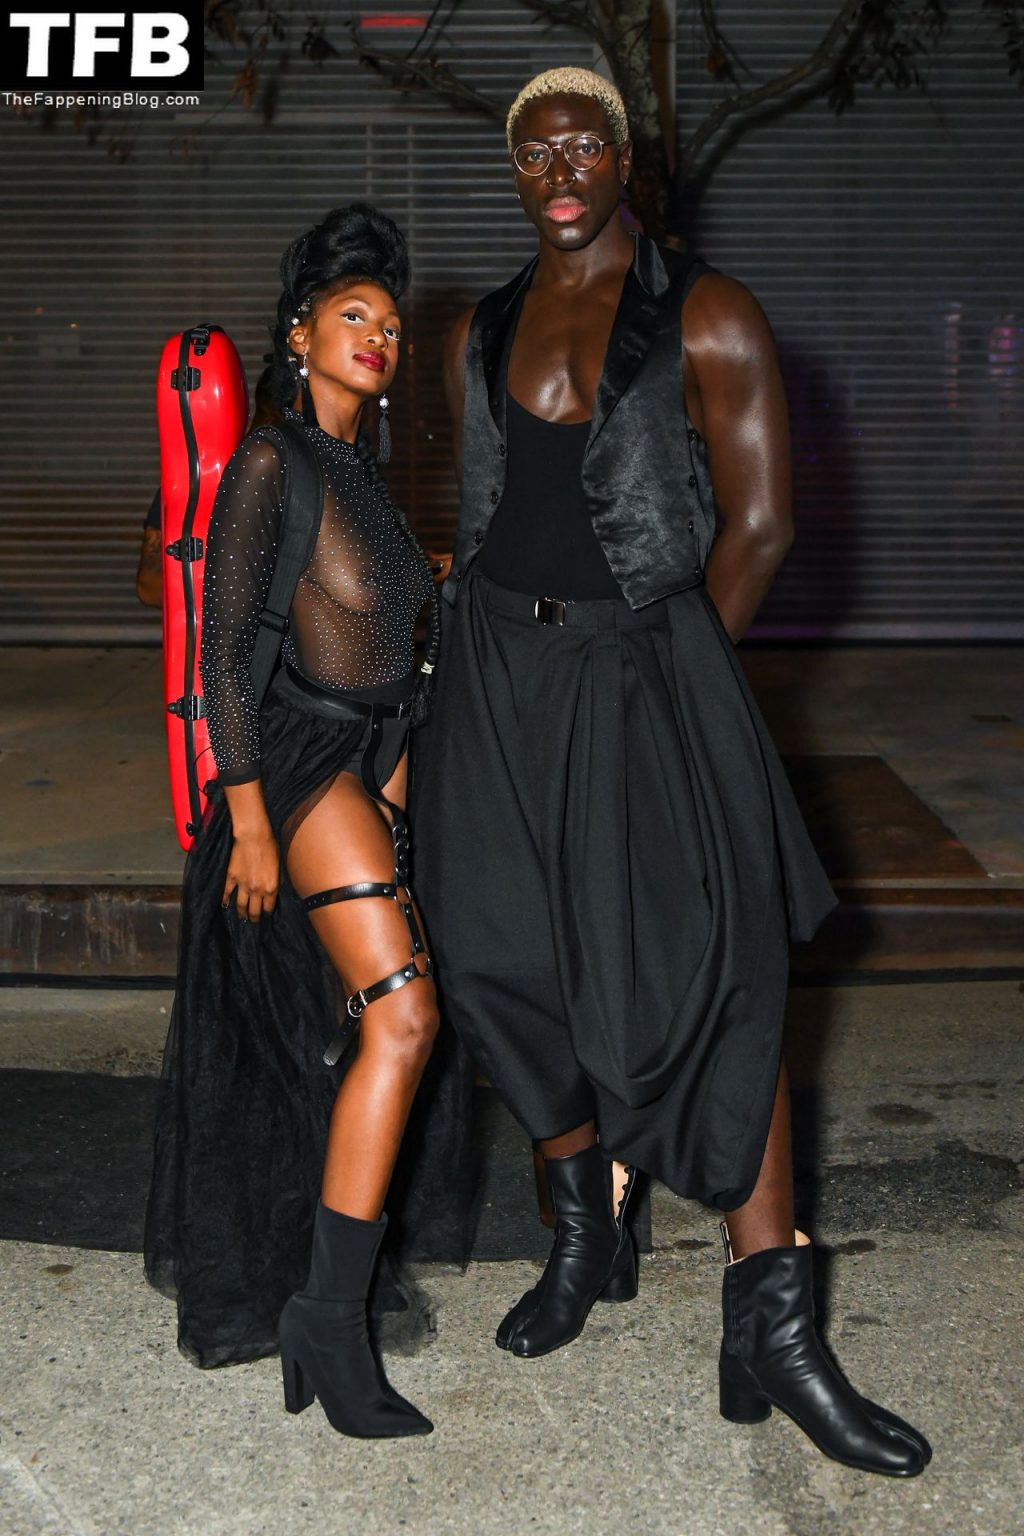 Bri Blvck Shows Off Her Nude Tits at The Event in New York (6 Photos)